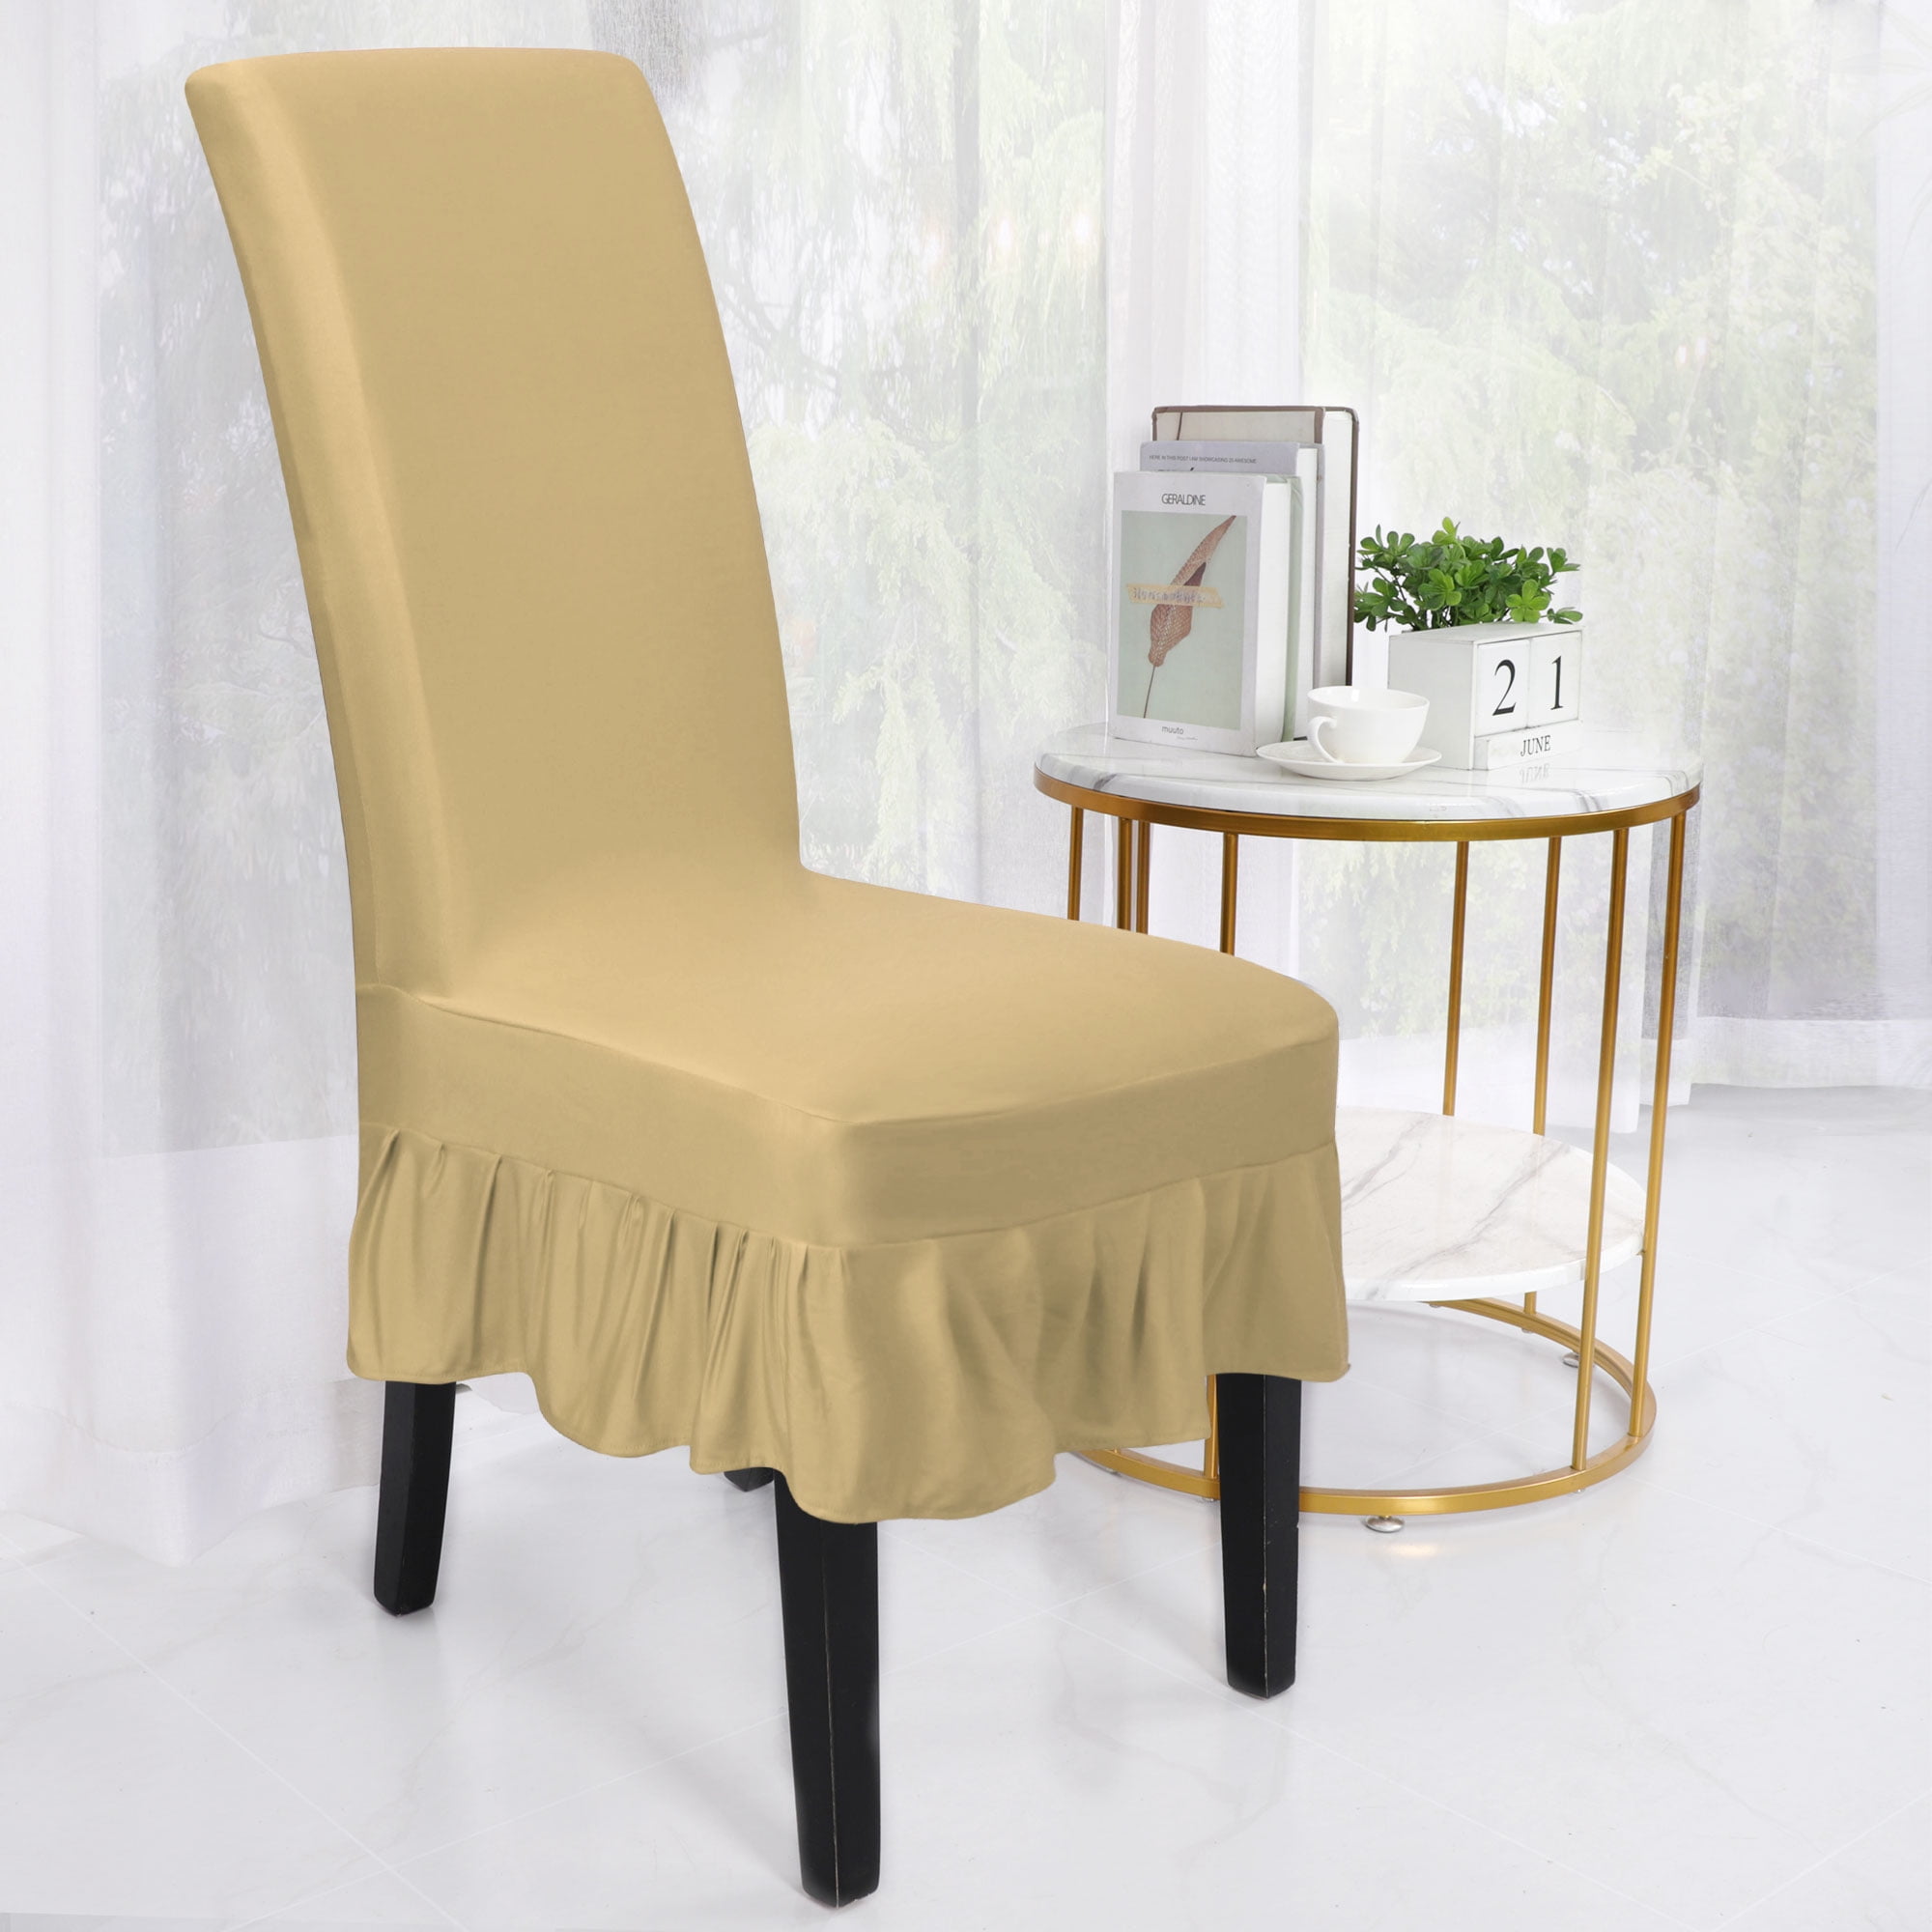 Details about   Dining Chair Covers Knit Stretch Solid Removable Banquet Chair Slipcovers 